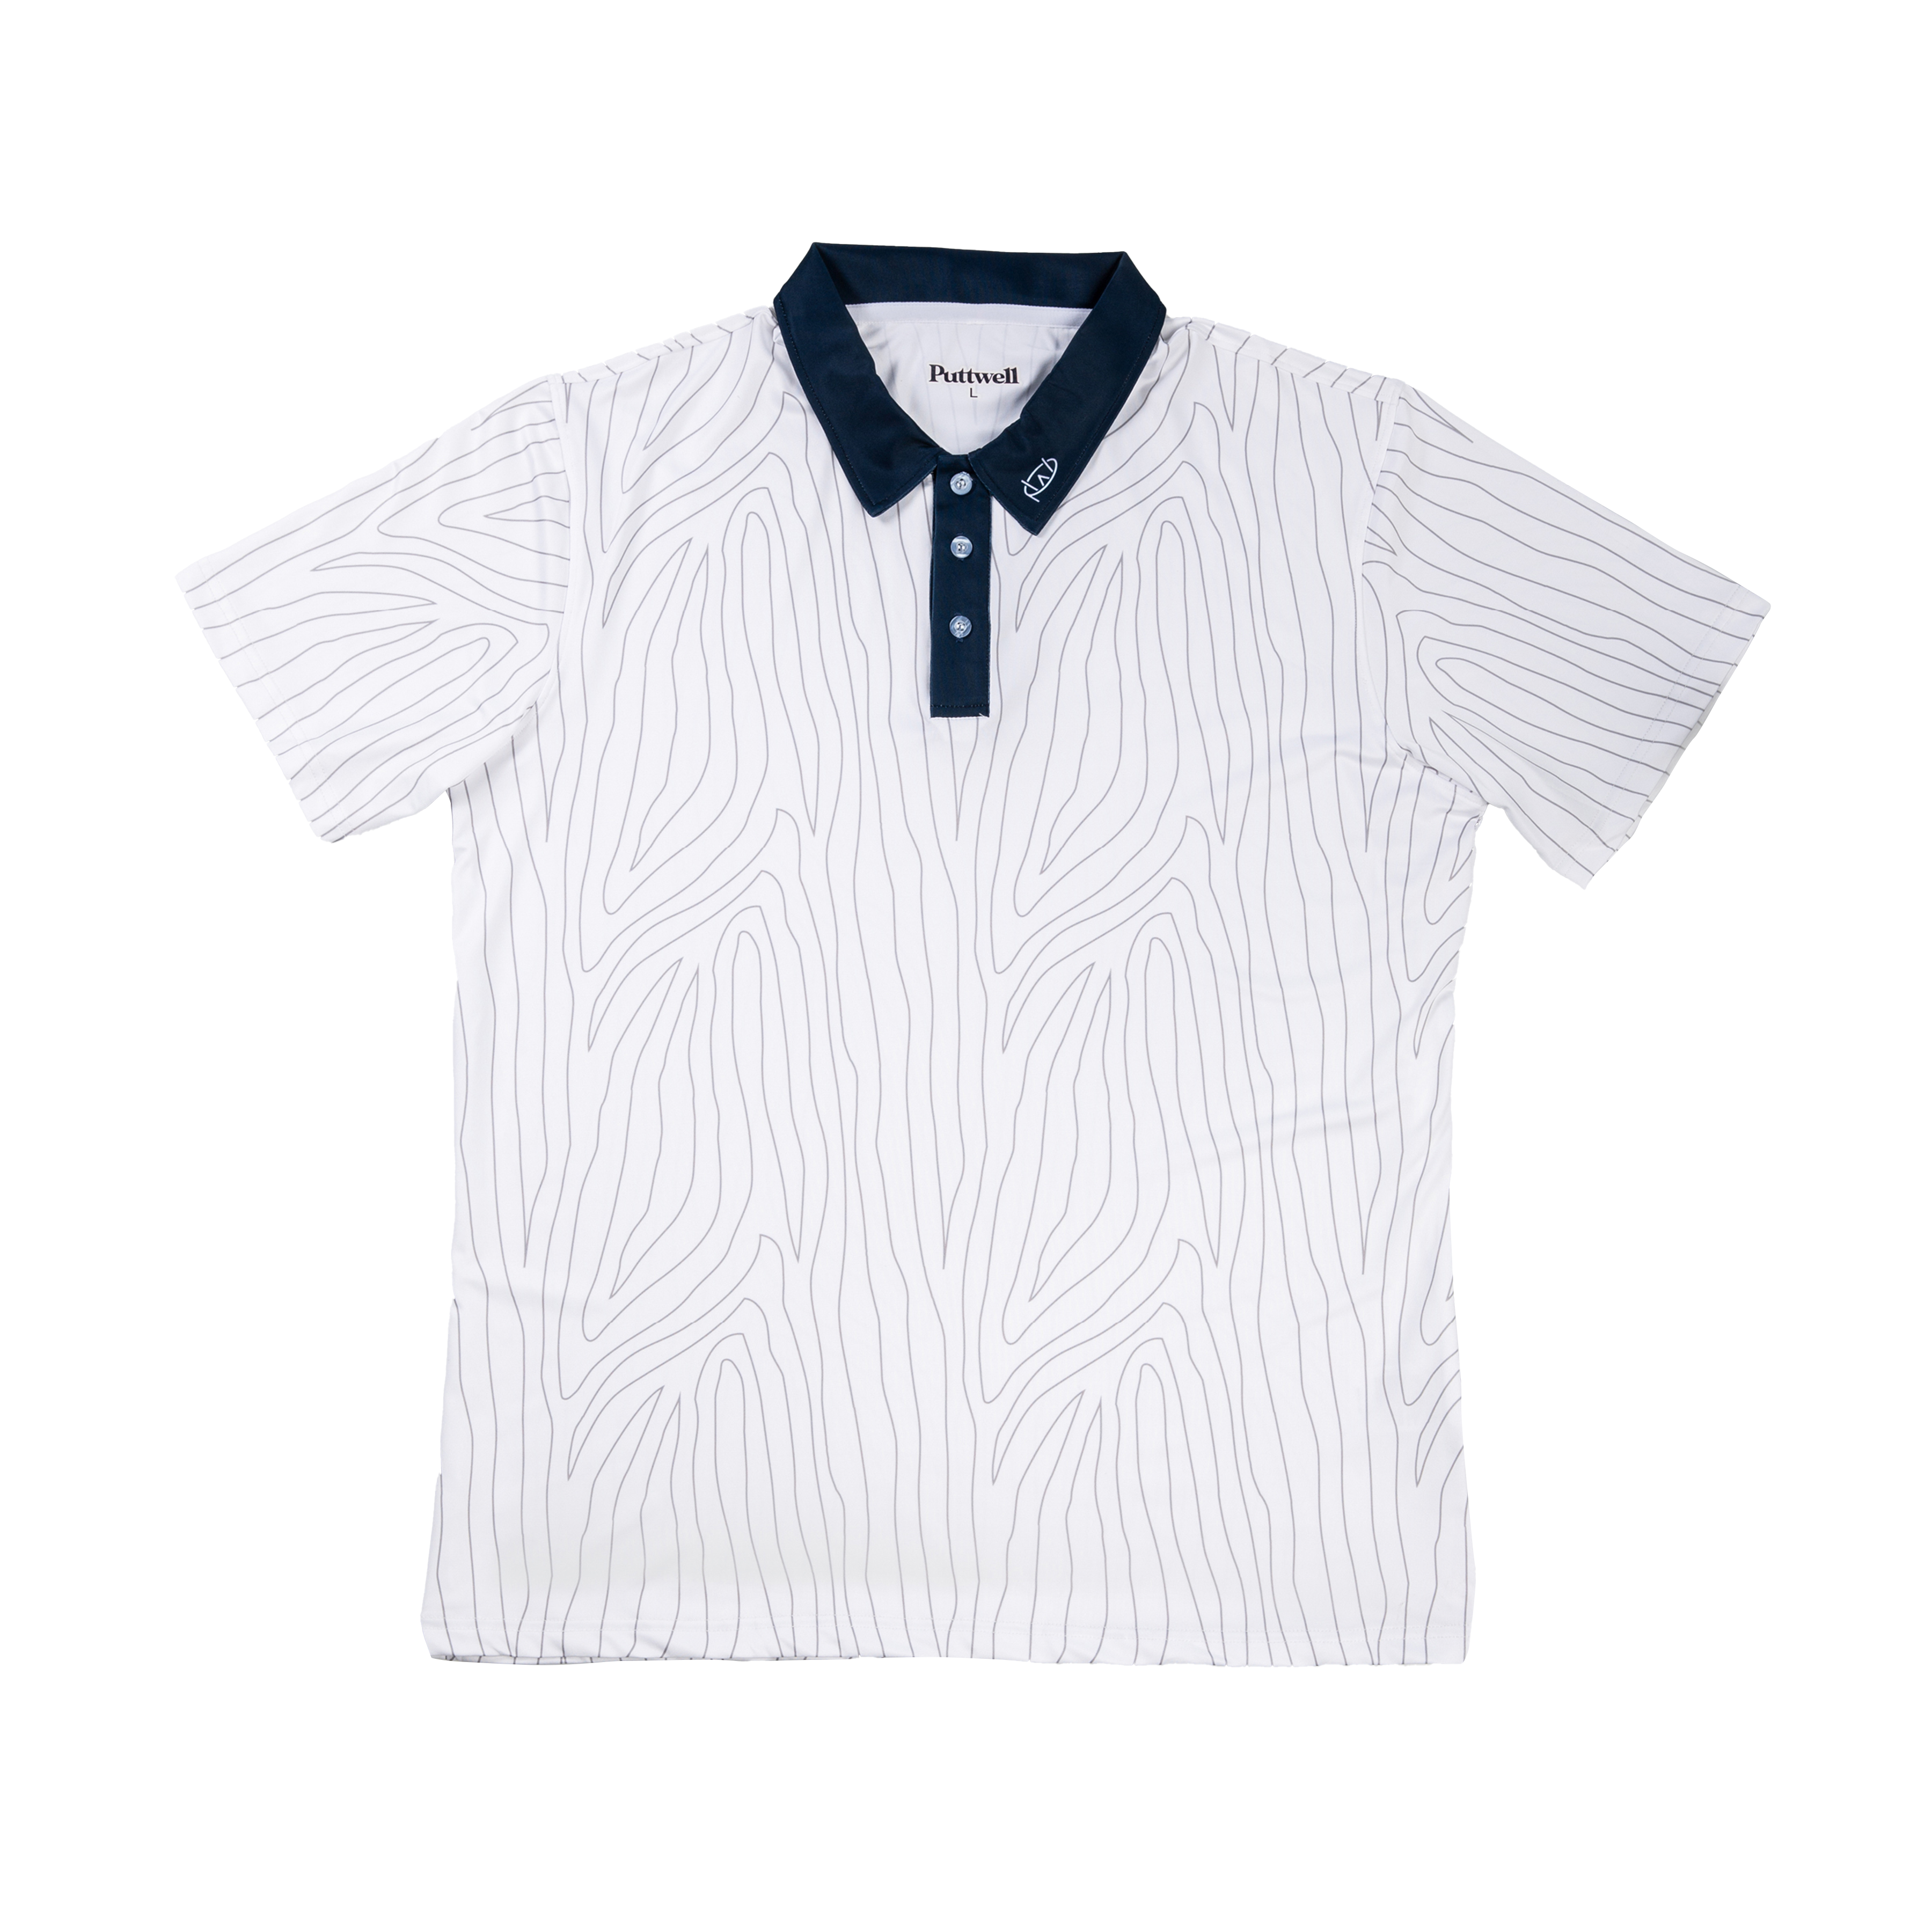 Puttwell Patchwork Polo